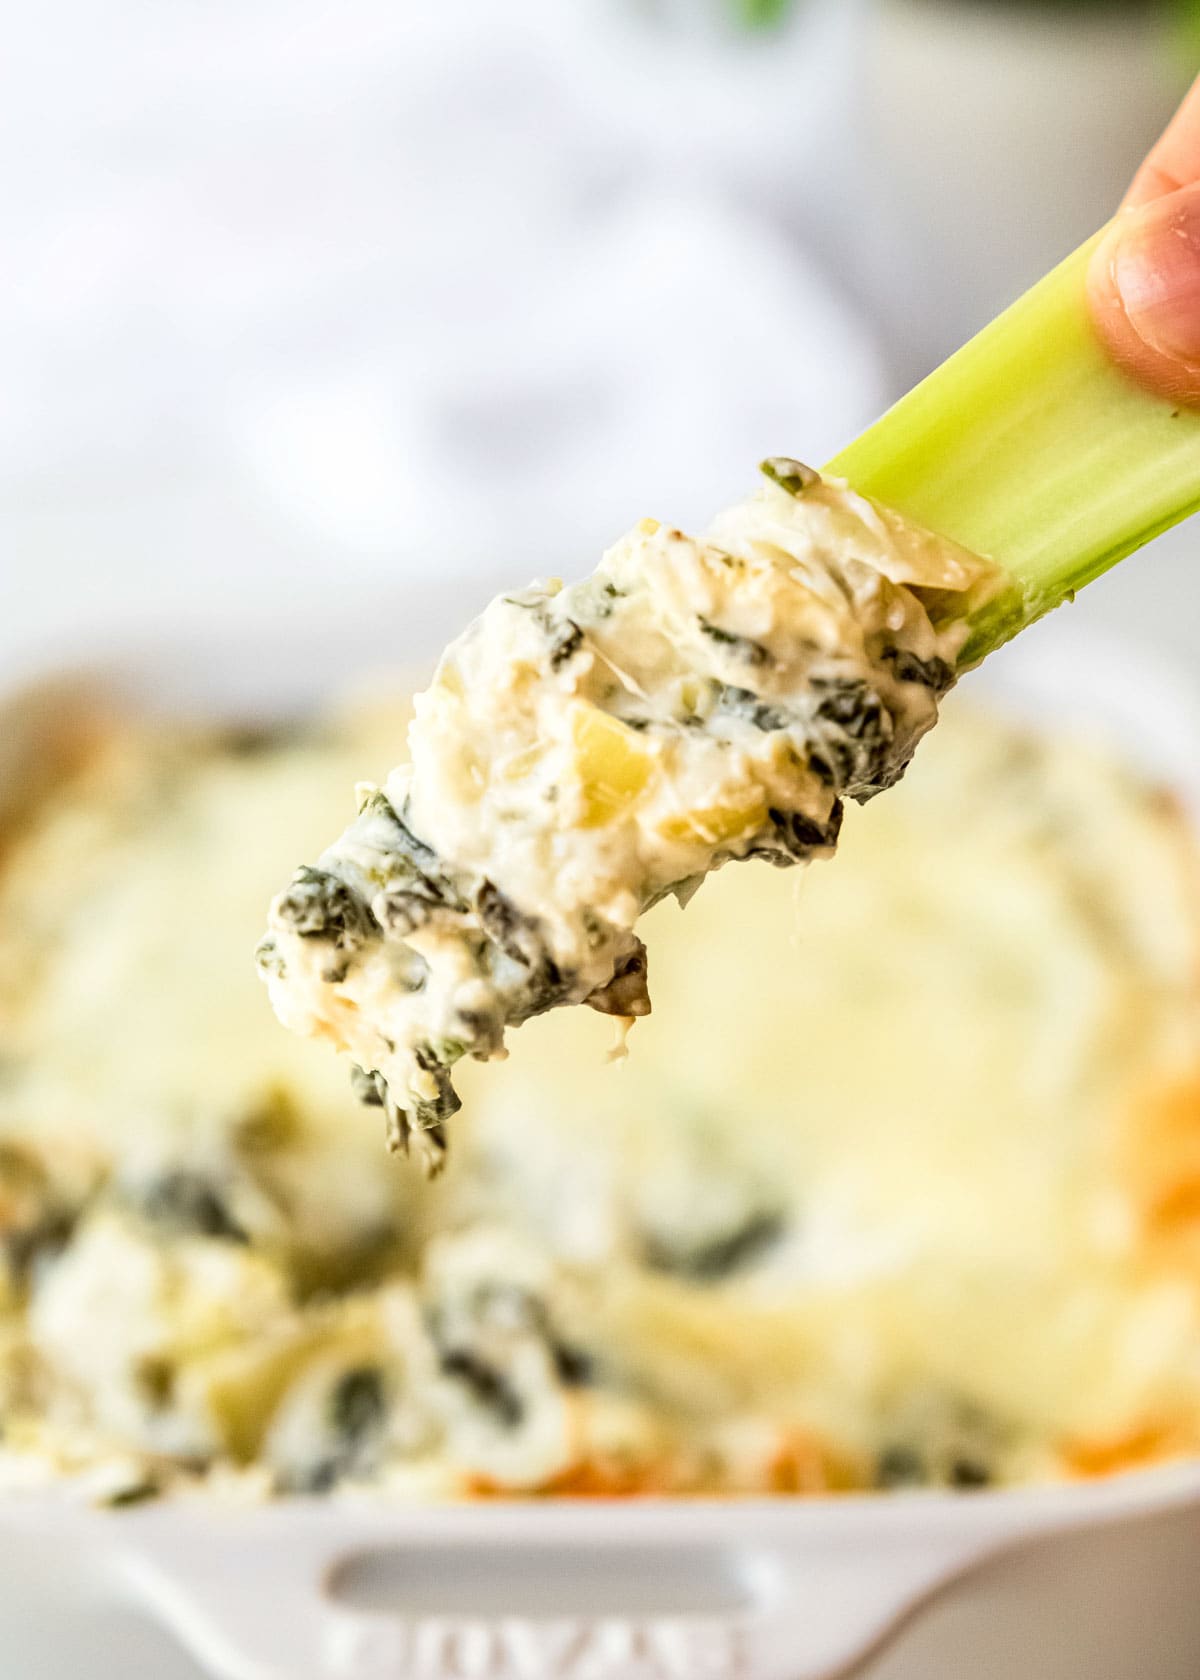 This classic Spinach Artichoke Dip is a favorite at the appetizer table! Perfect for lunches, potlucks, tailgating, and holidays.